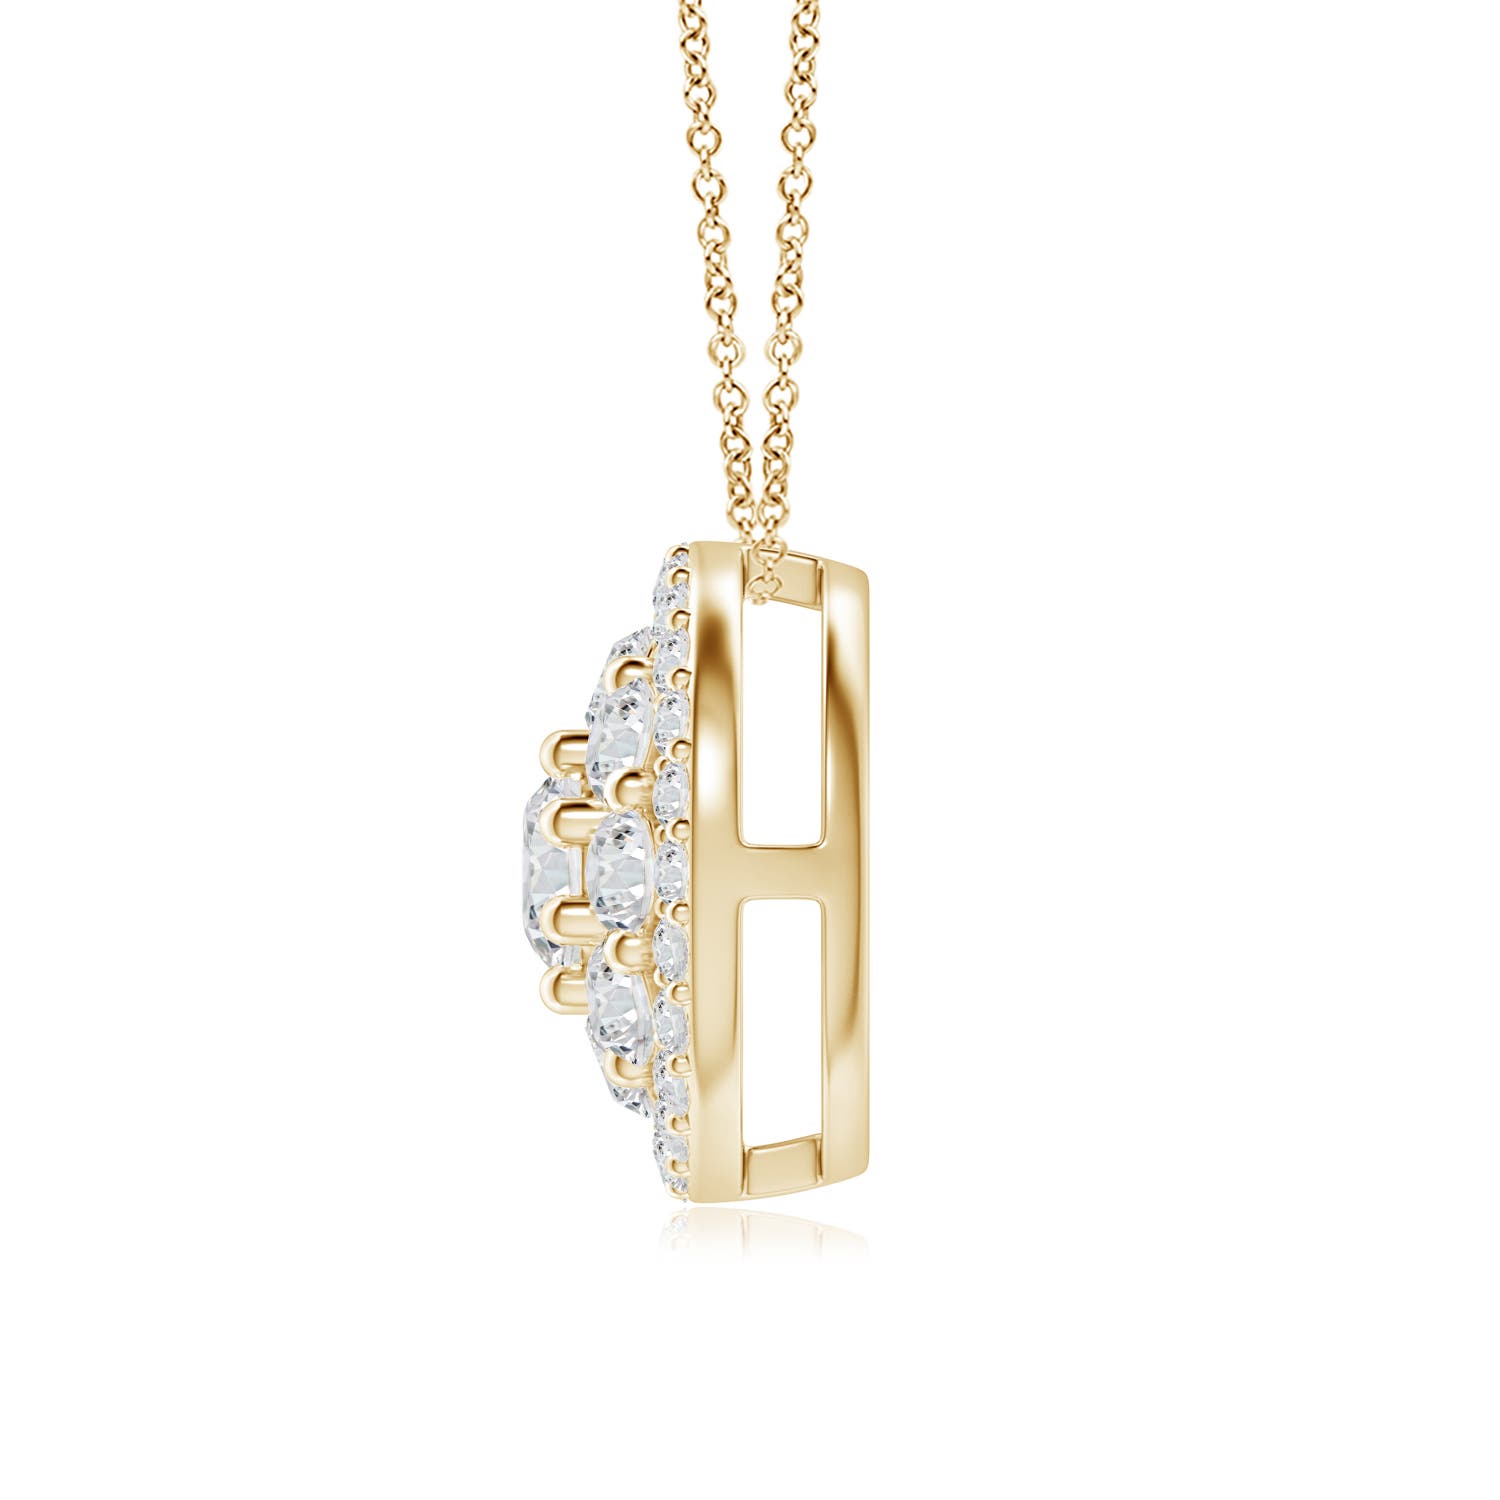 H, SI2 / 1.33 CT / 14 KT Yellow Gold